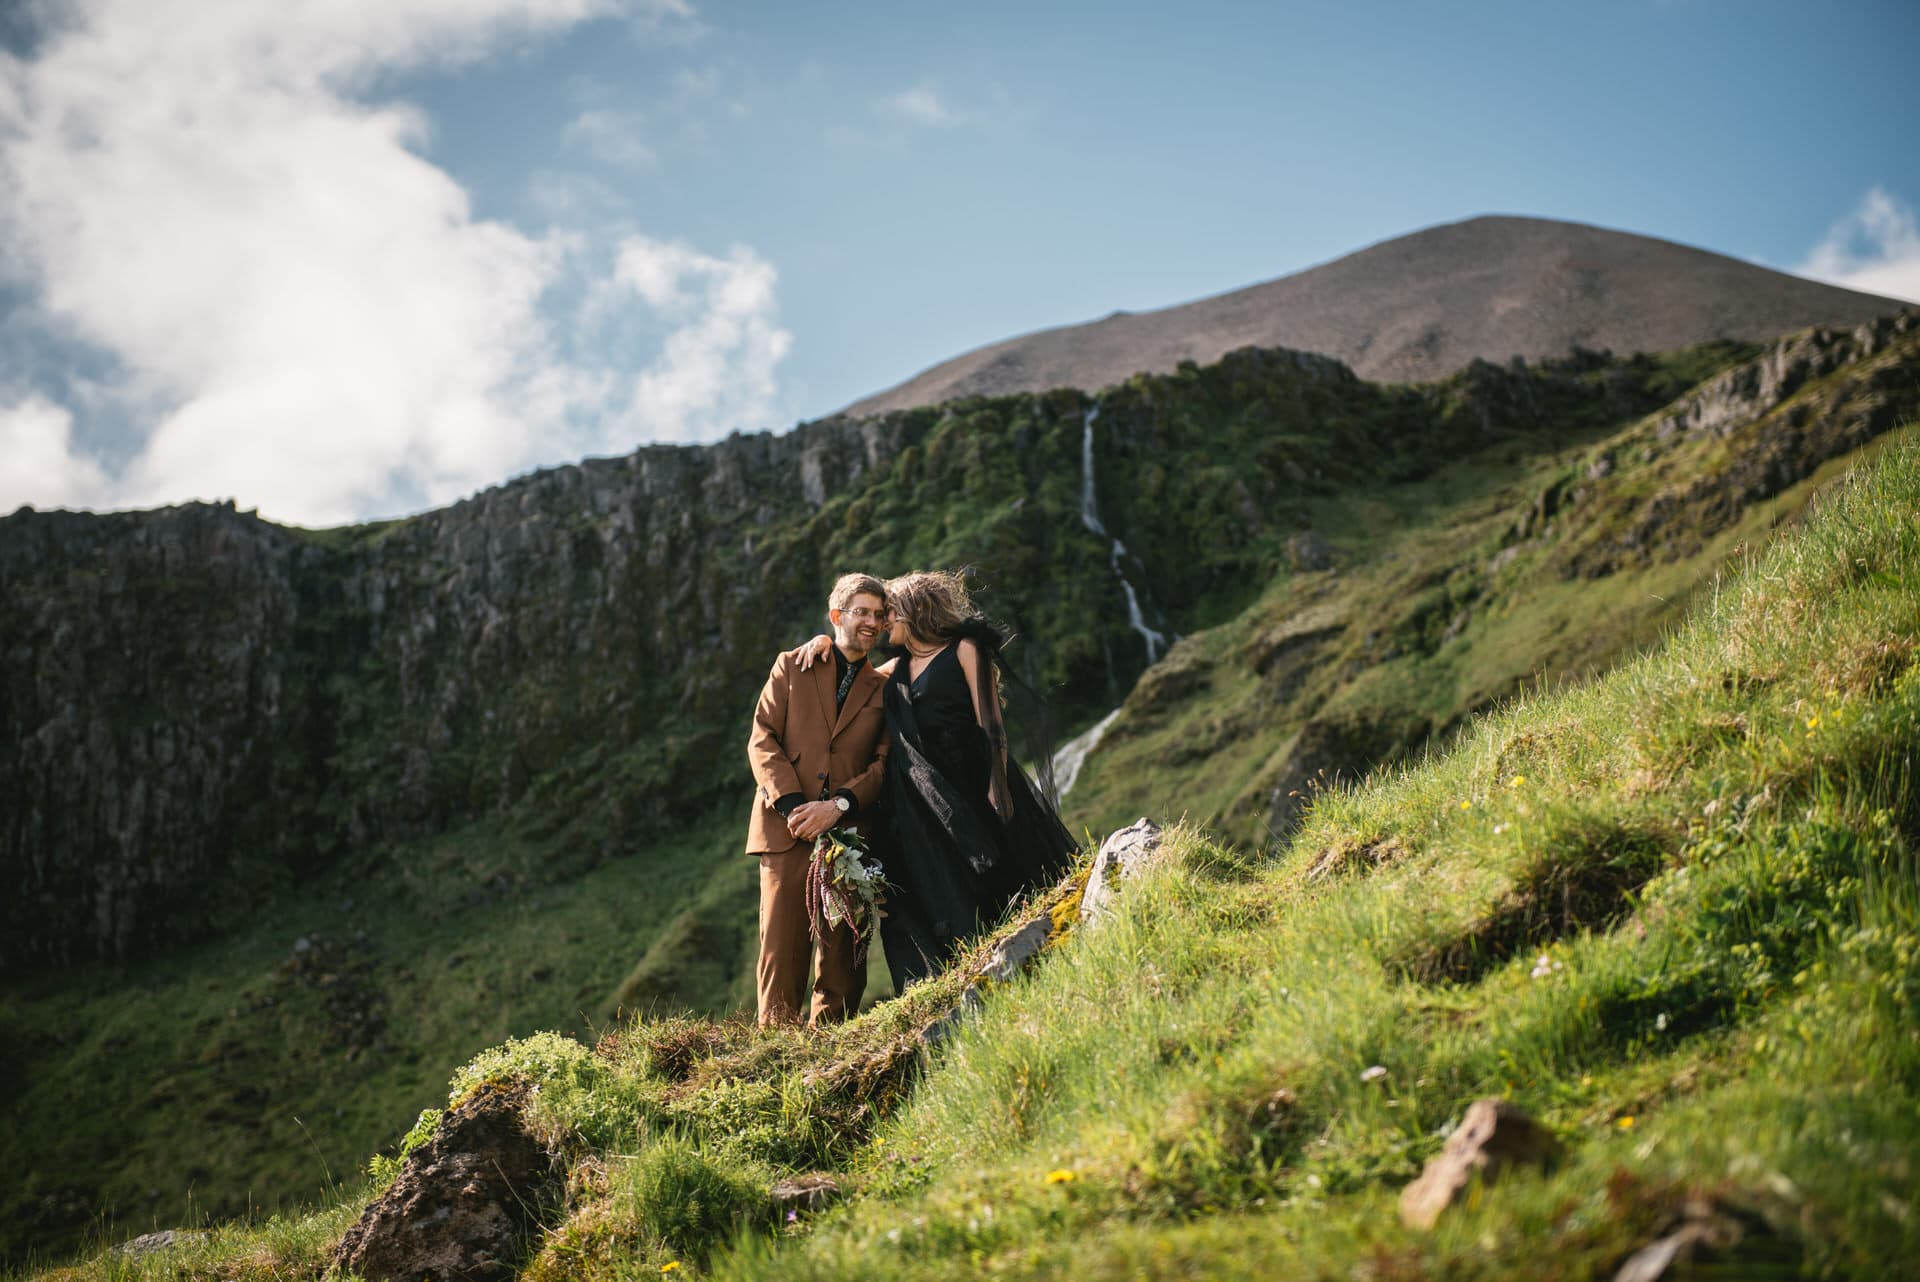 Windswept kisses shared atop a picturesque Westfjords cliff.